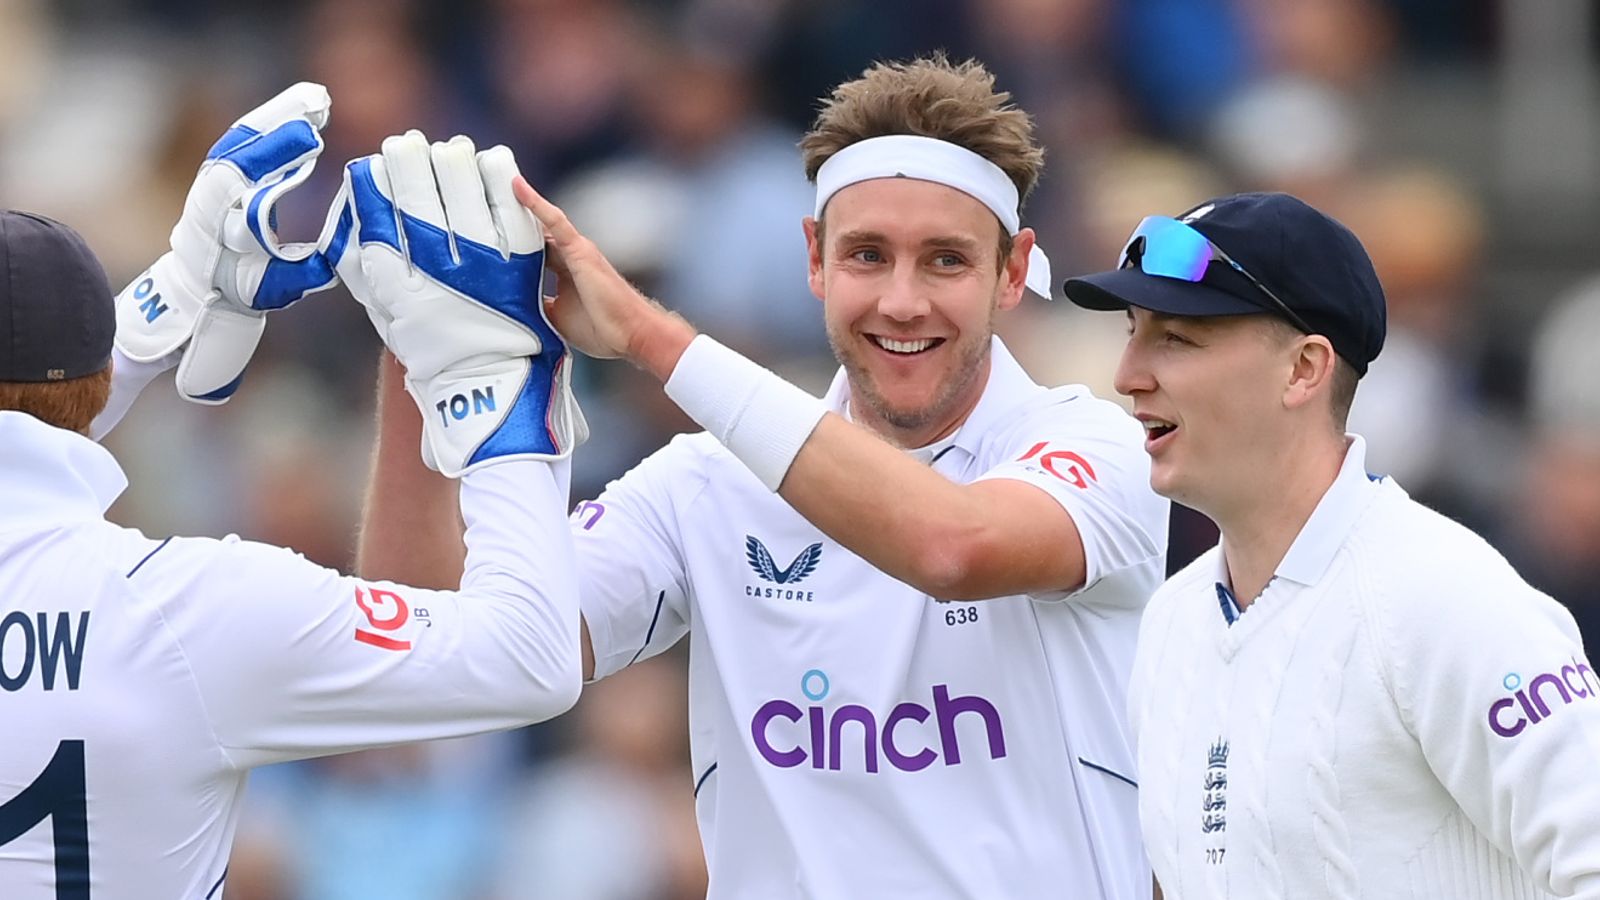 Stuart Broad and 'Bazball' centre stage as England dominate opening day against Ireland at Lord's